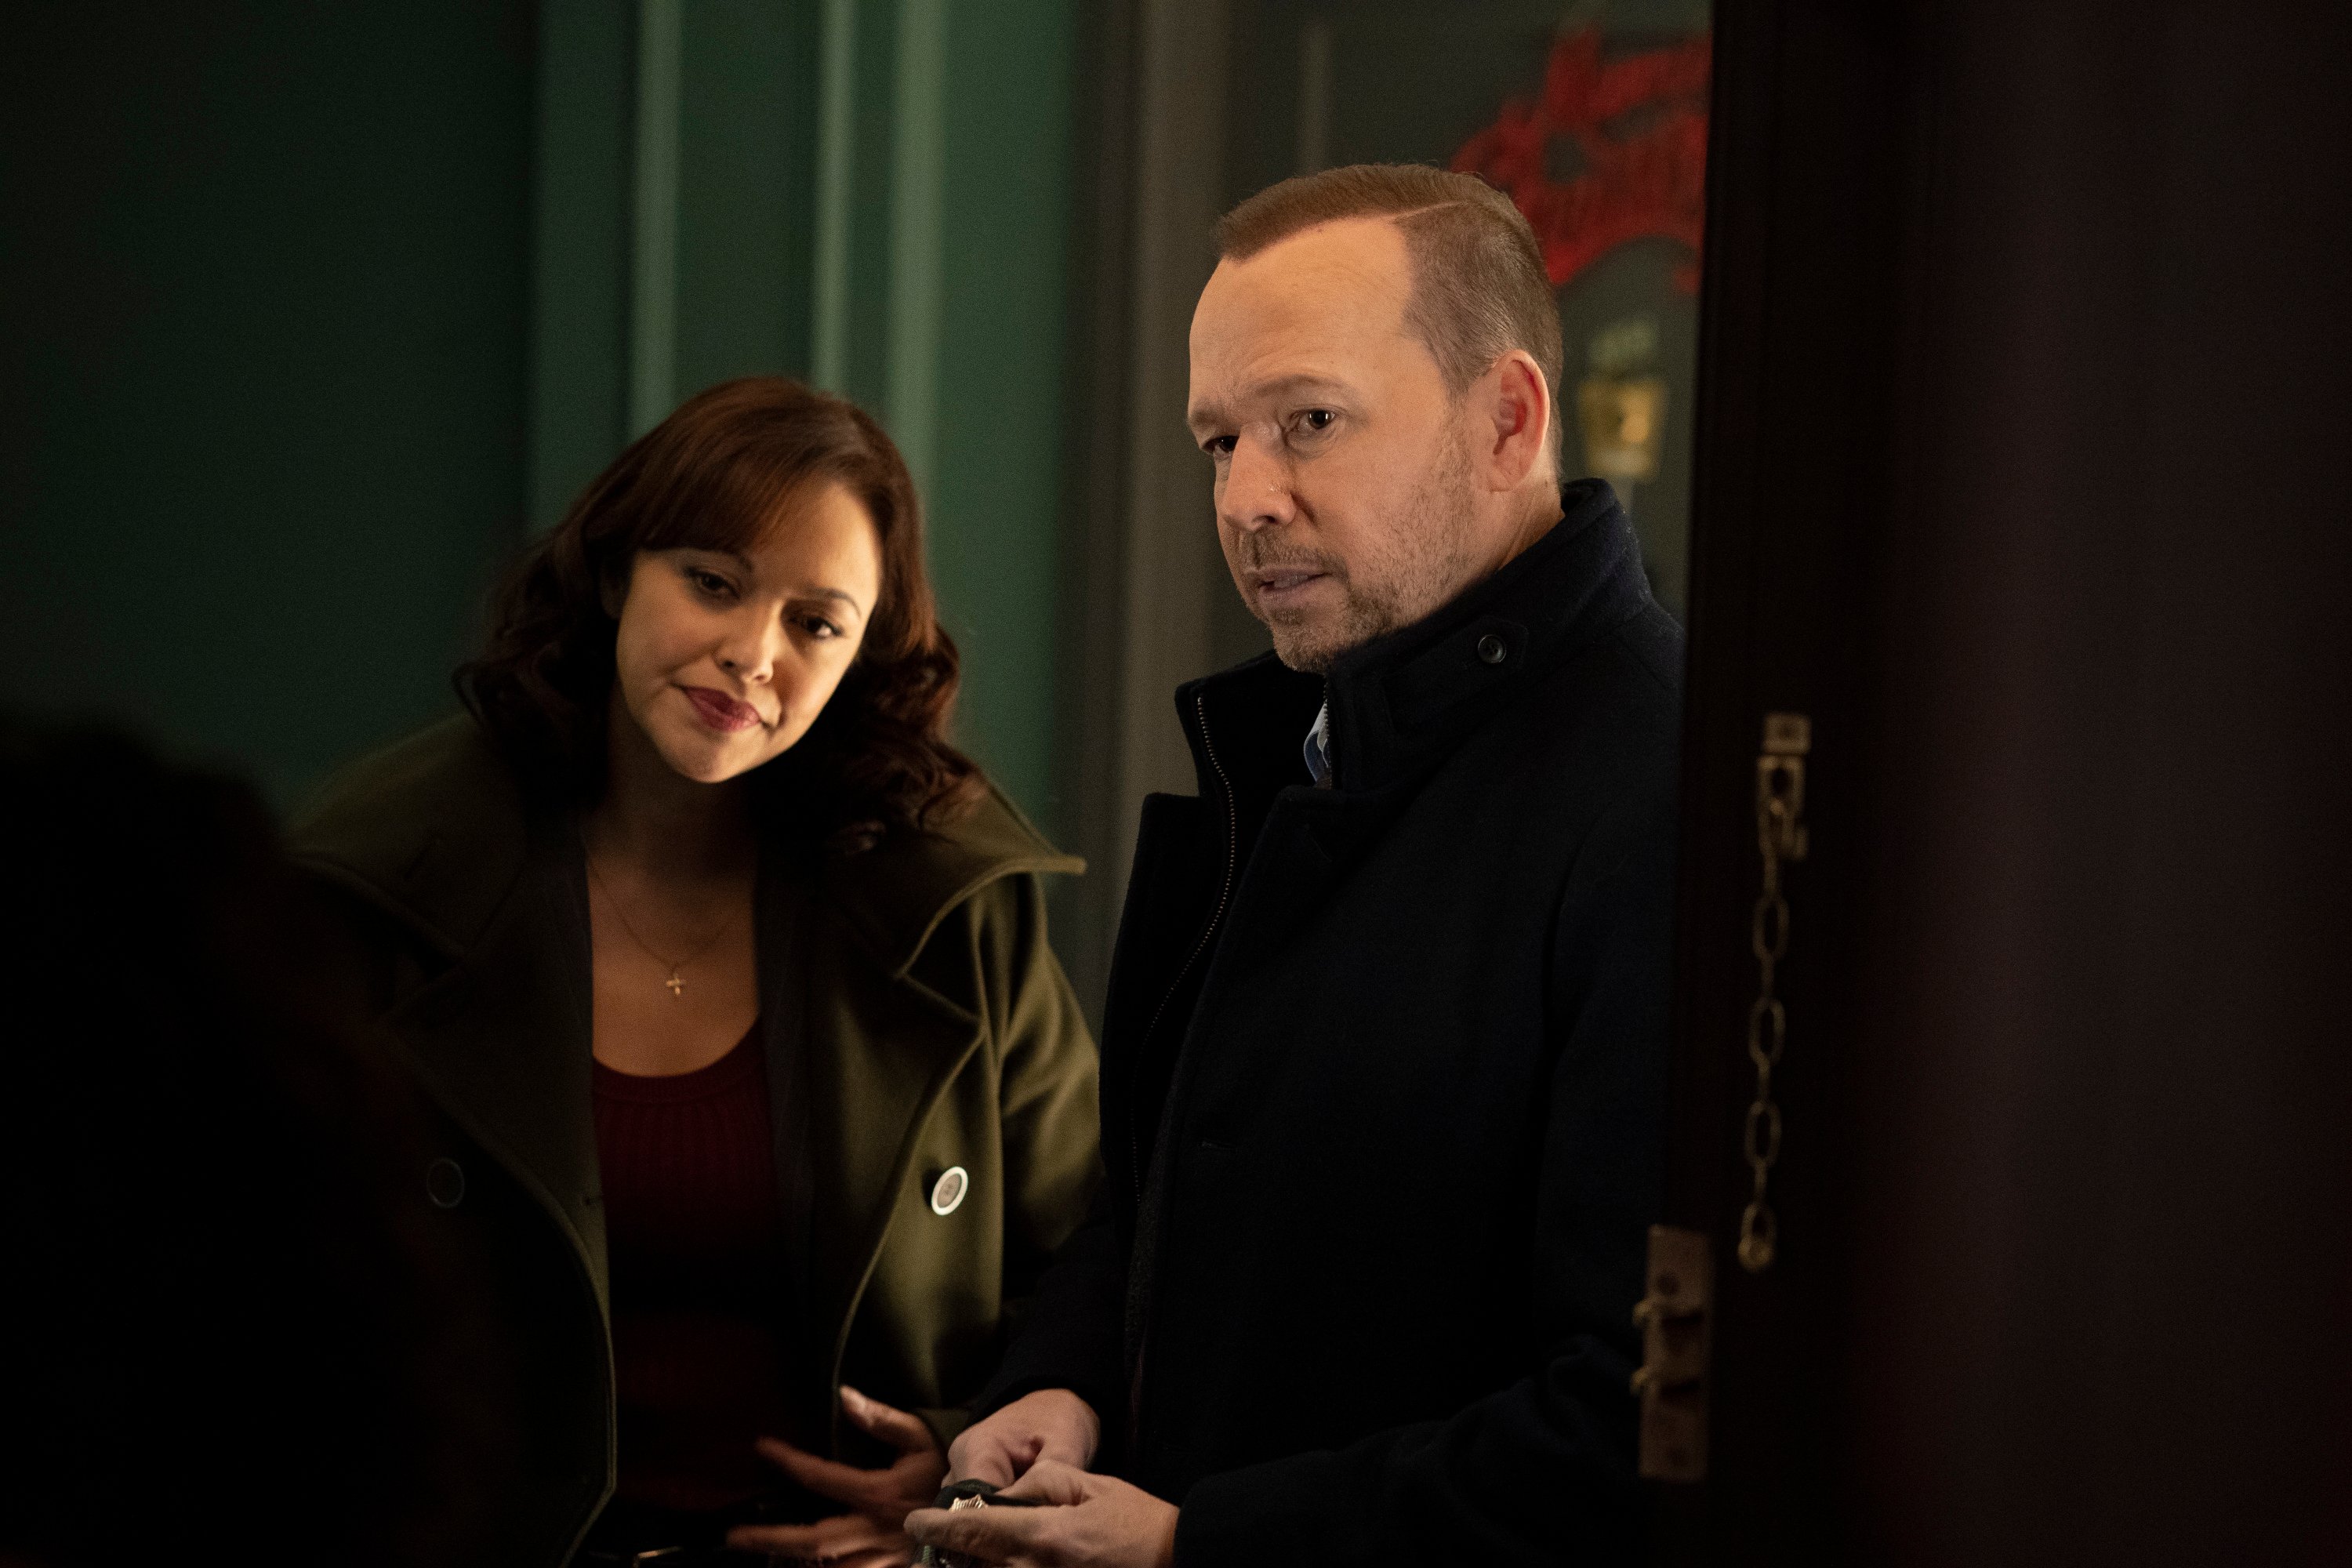 Baez and Reagan are going to have a tough time on 'Blue Bloods' this week.